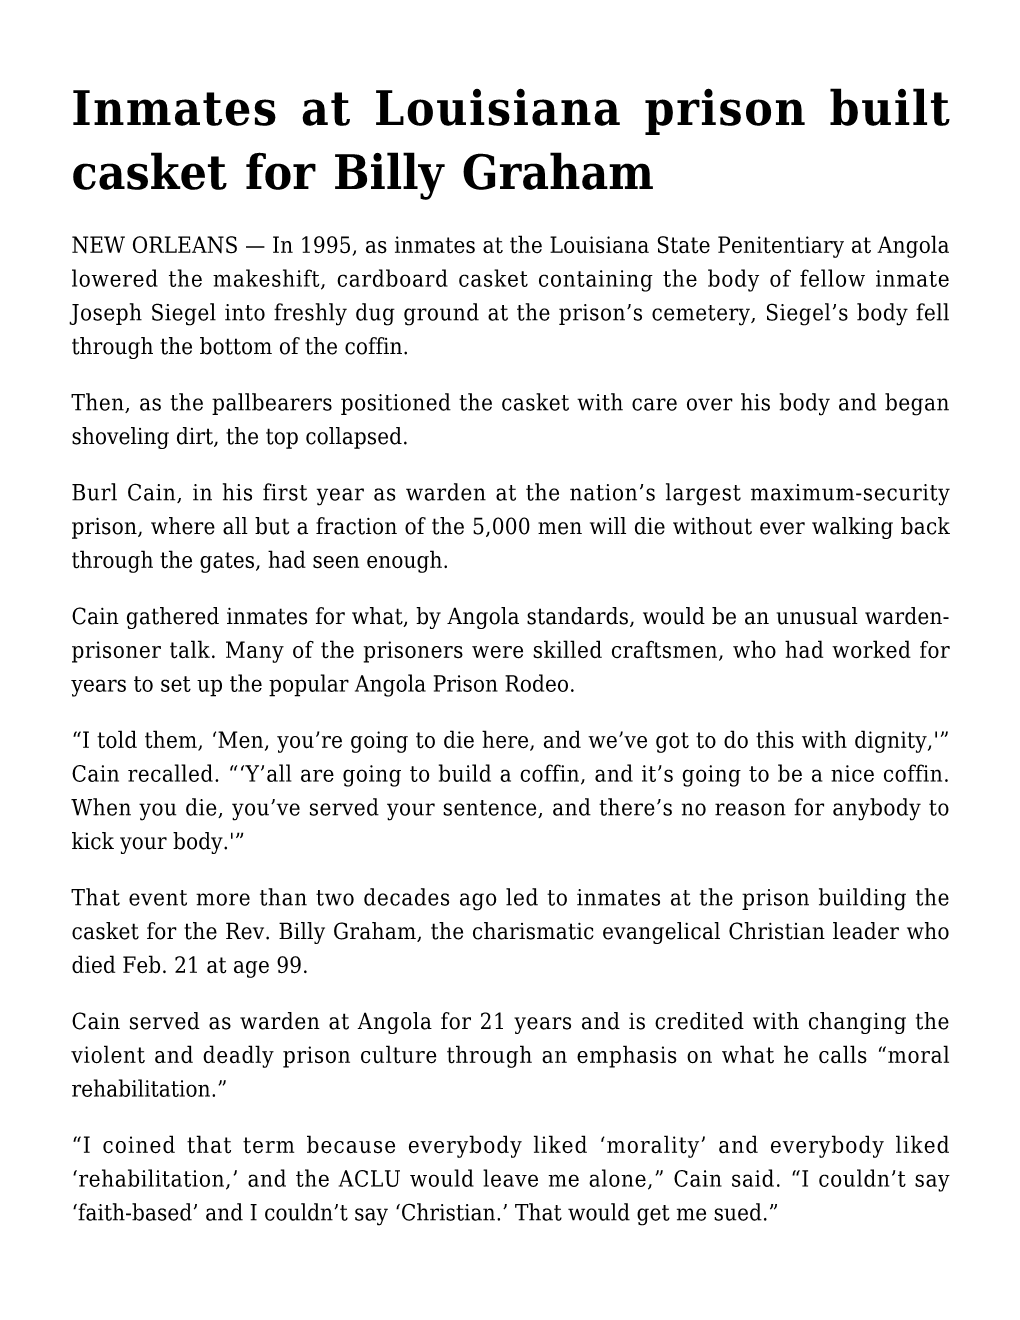 Inmates at Louisiana Prison Built Casket for Billy Graham